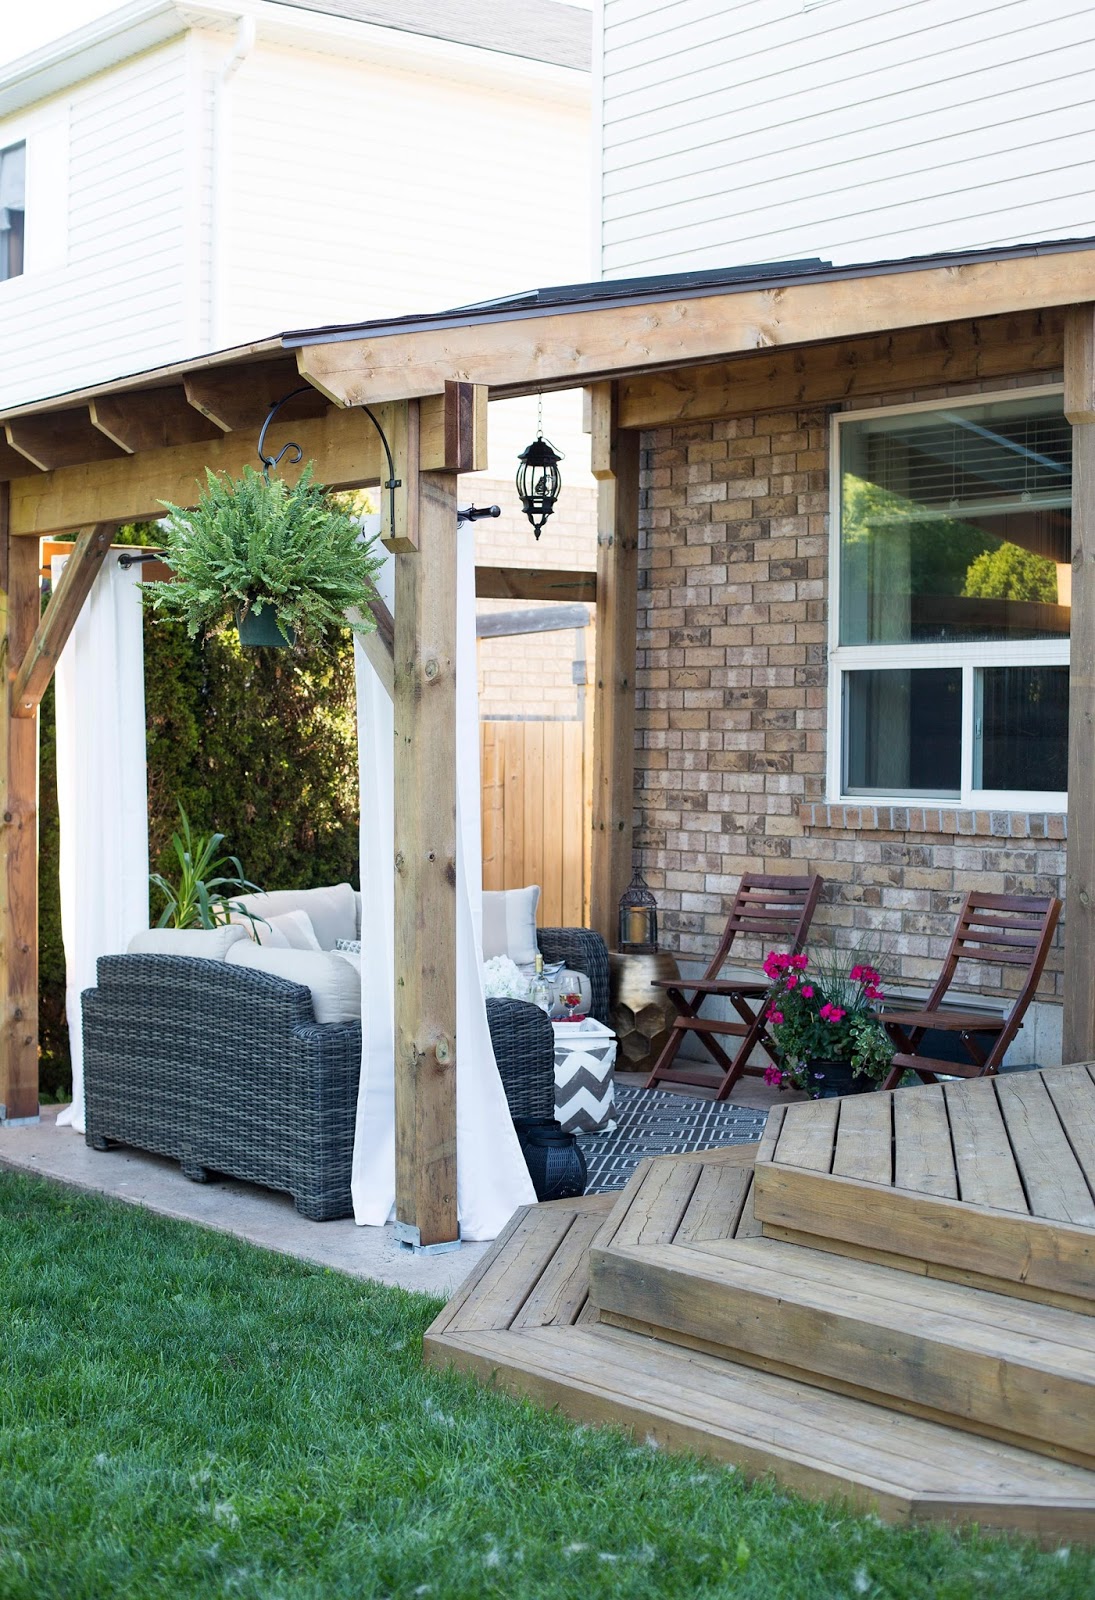 How To Build A Covered Patio, How To Build Your Own Patio Cover